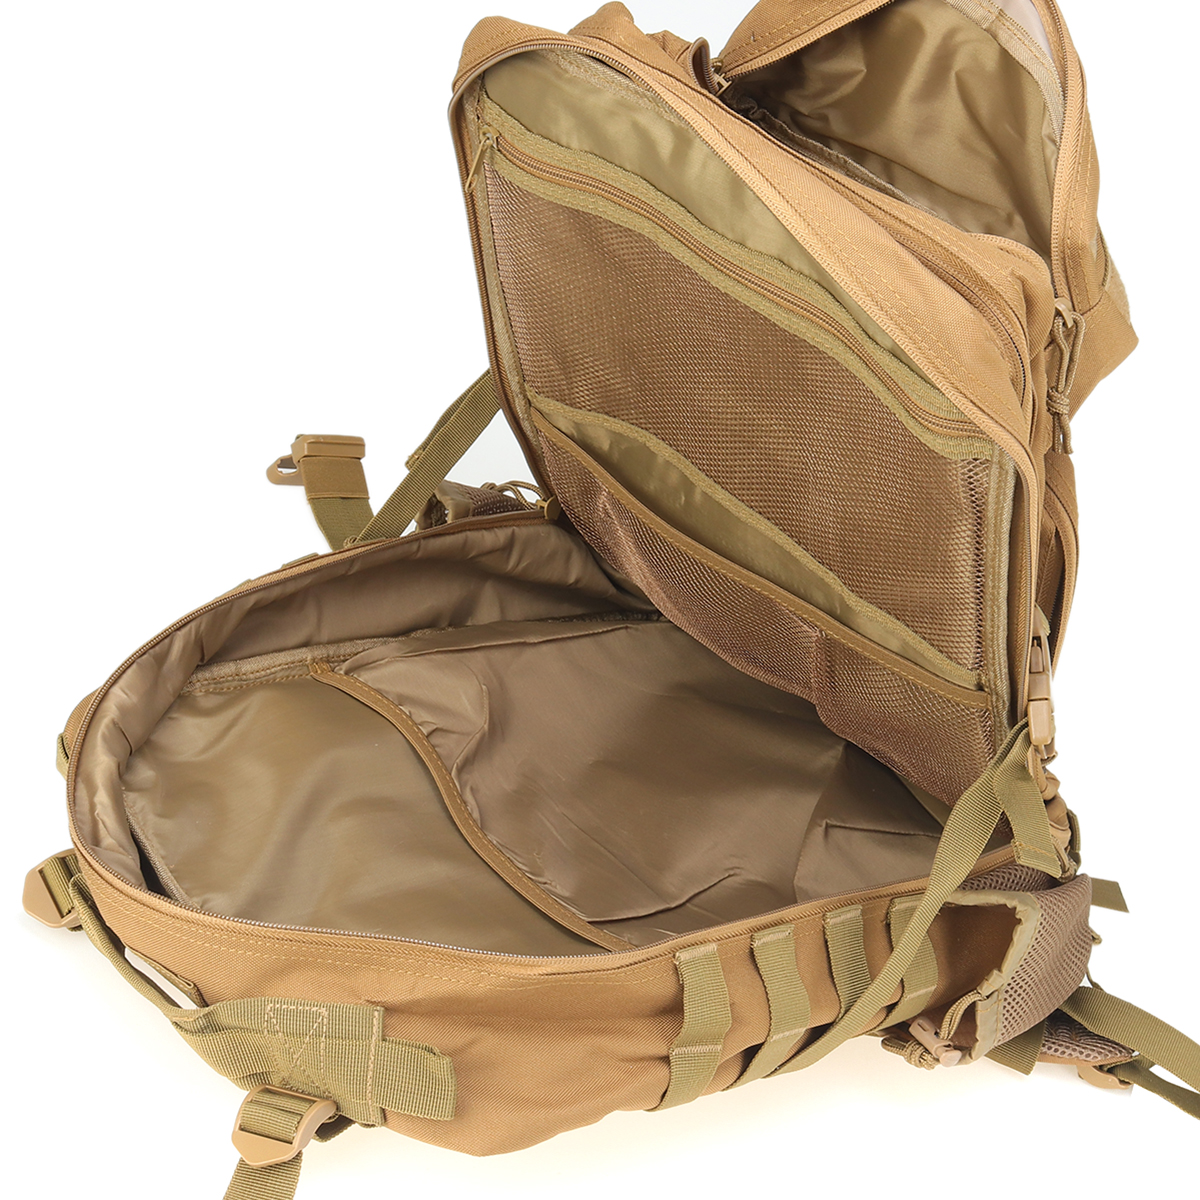 45L-900D-Waterproof-Tactical-Backpack-Oxford-Cloth-Molle-Military-Outdoor-Bag-Traveling-Camping-Hiki-1560781-6